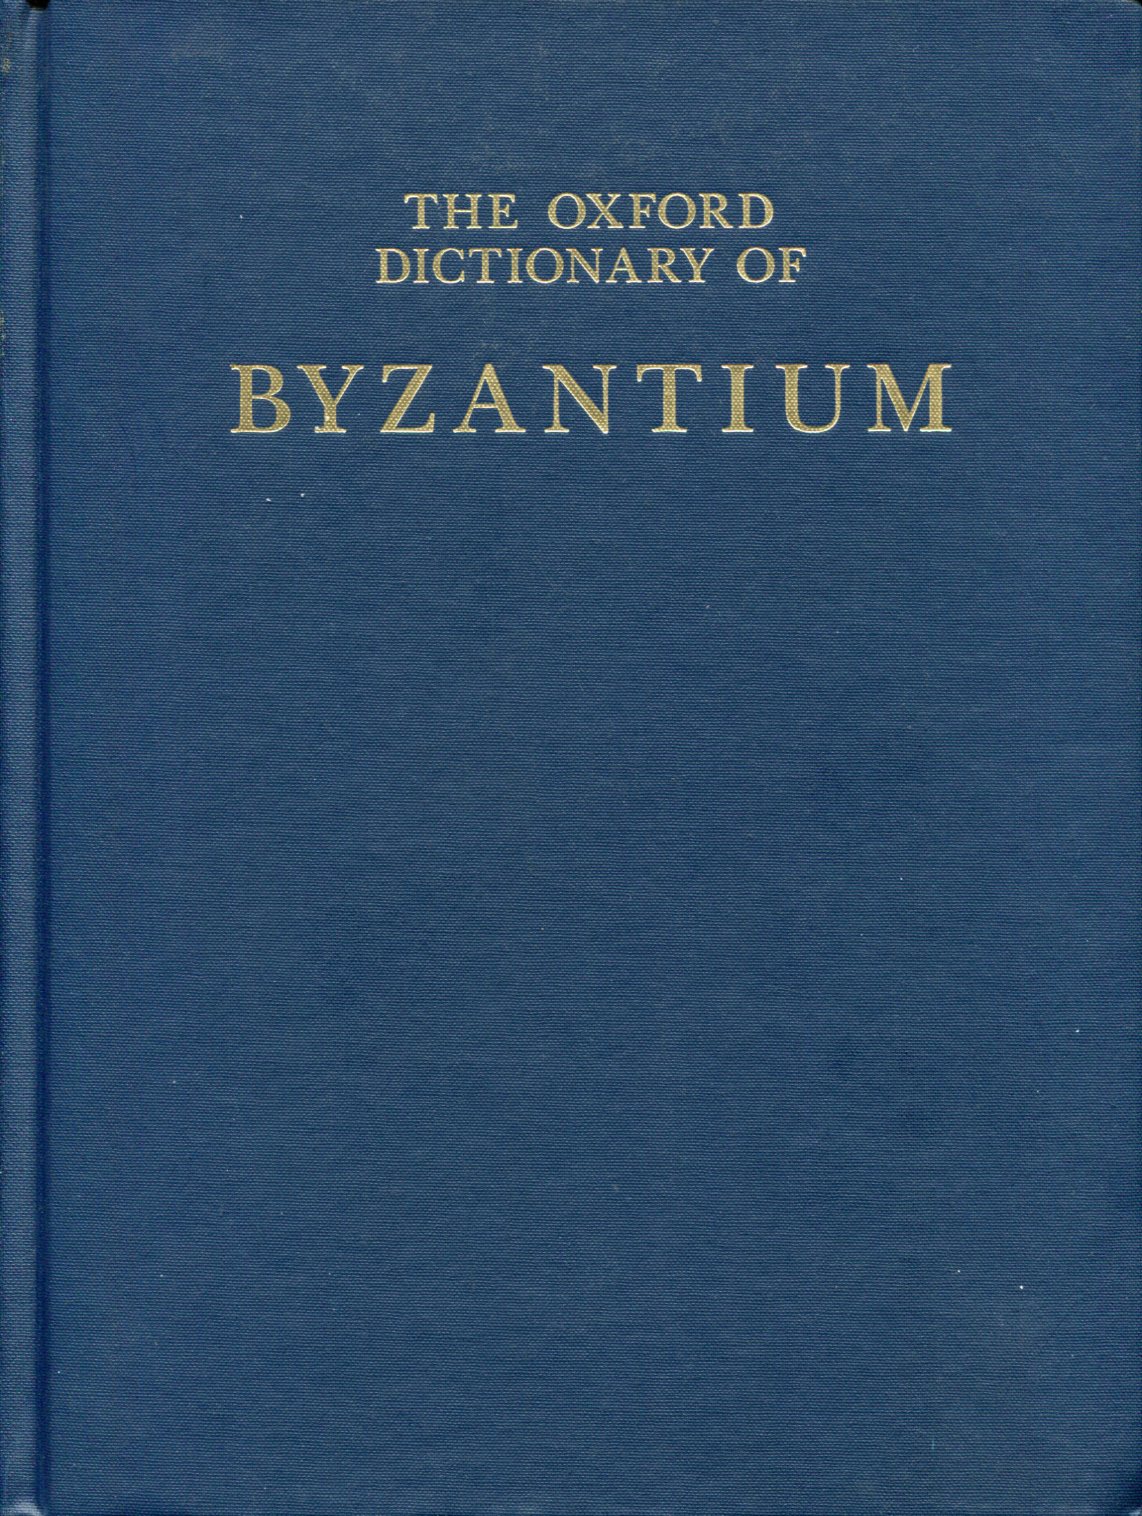 THE OXFORD DICTIONARY OF BYZANTIUM, 3 VOLUMES